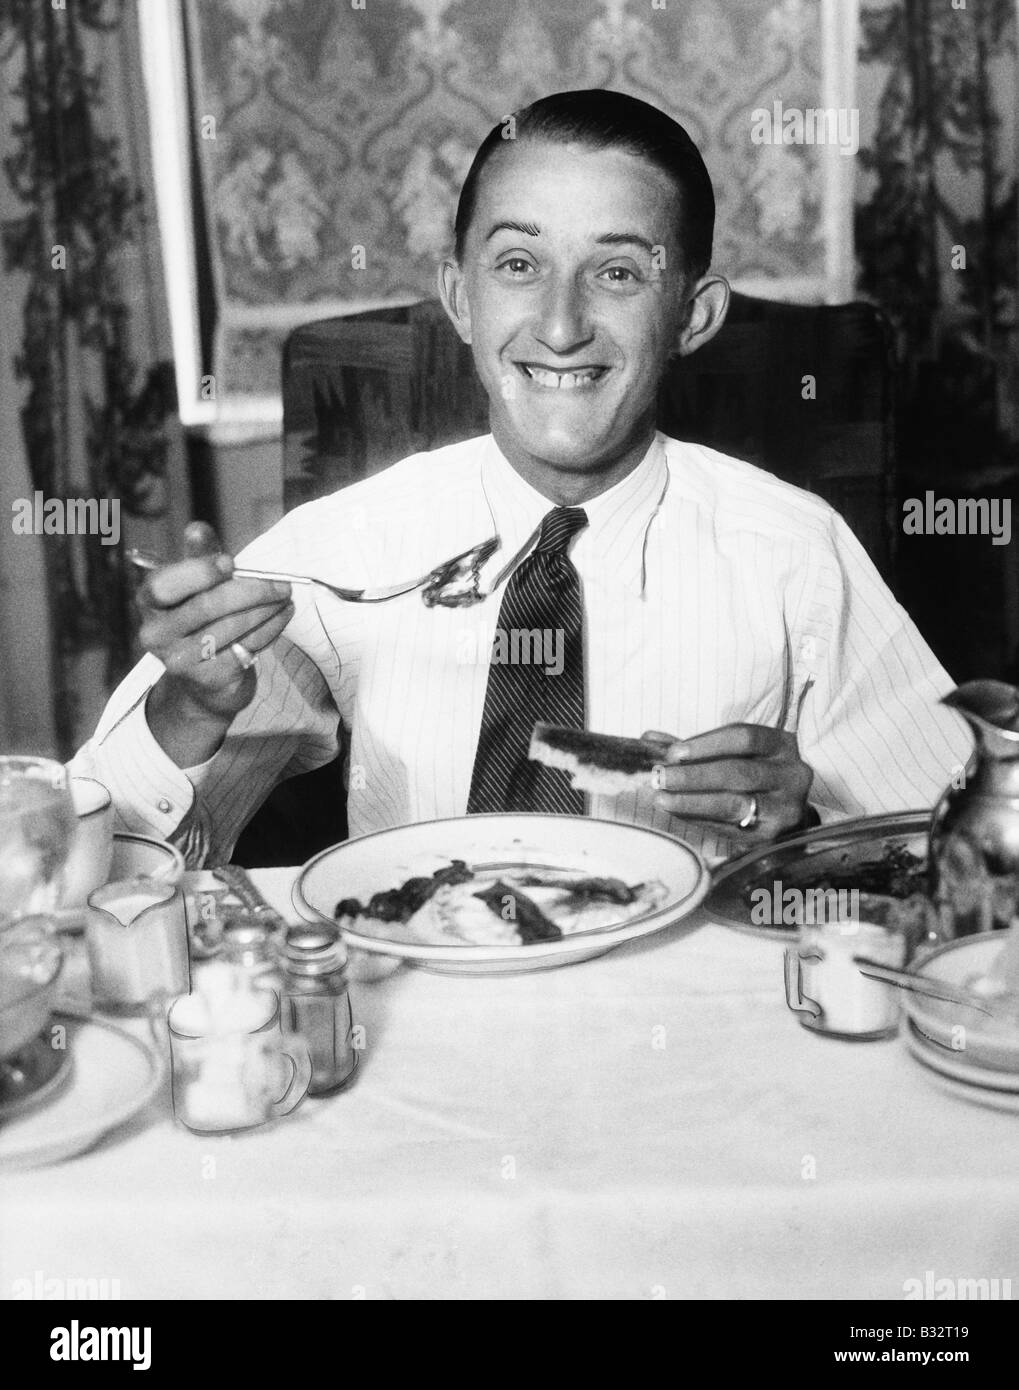 Young man having breakfast and smiling Stock Photo